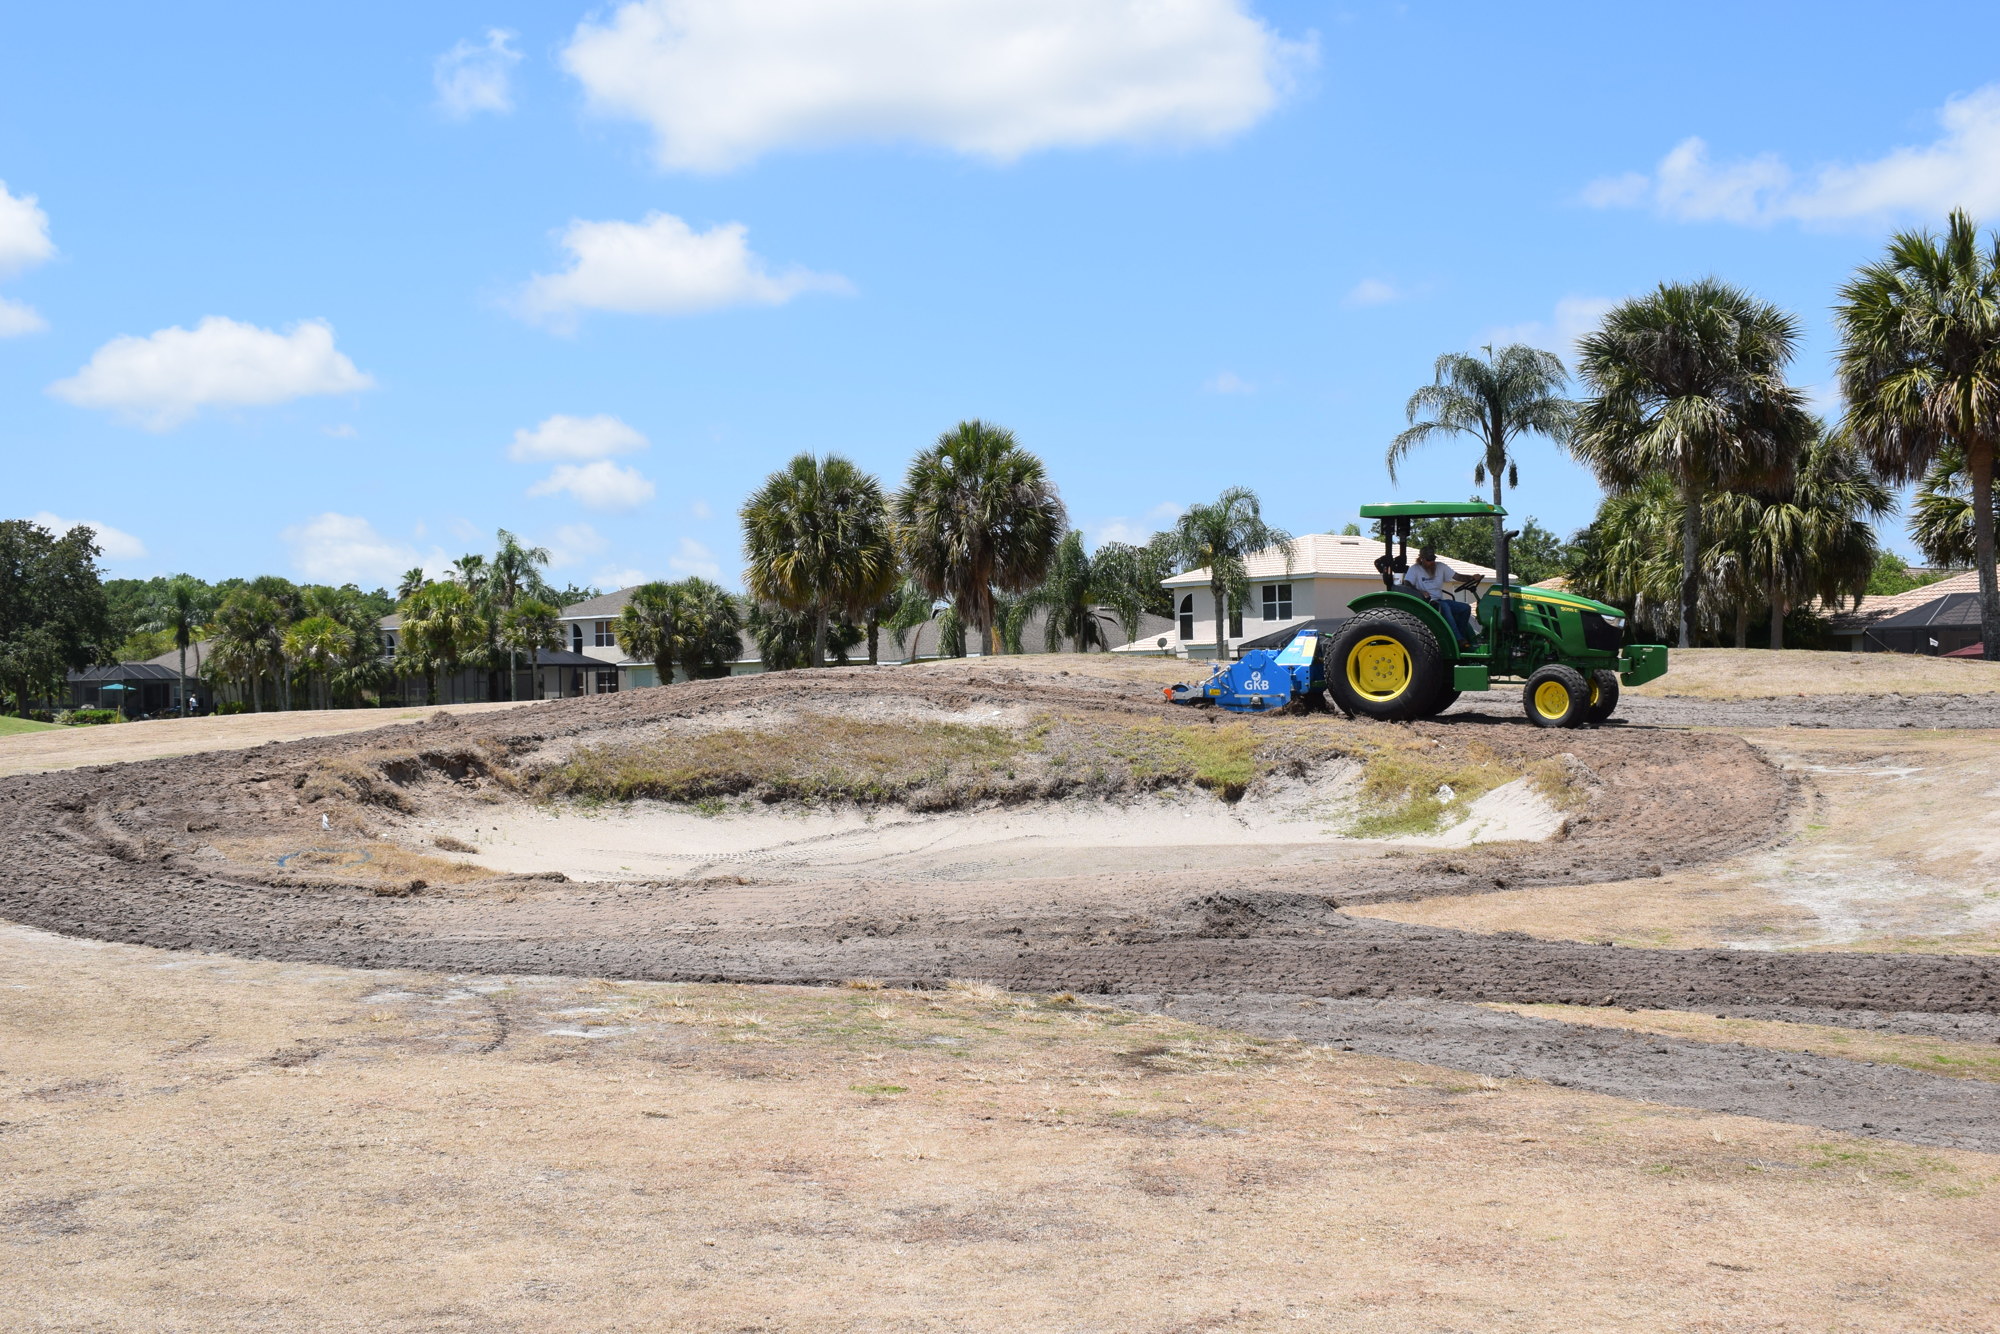 The redesign of the Heritage Harbour Golf Course will mean fewer and smaller sand traps.